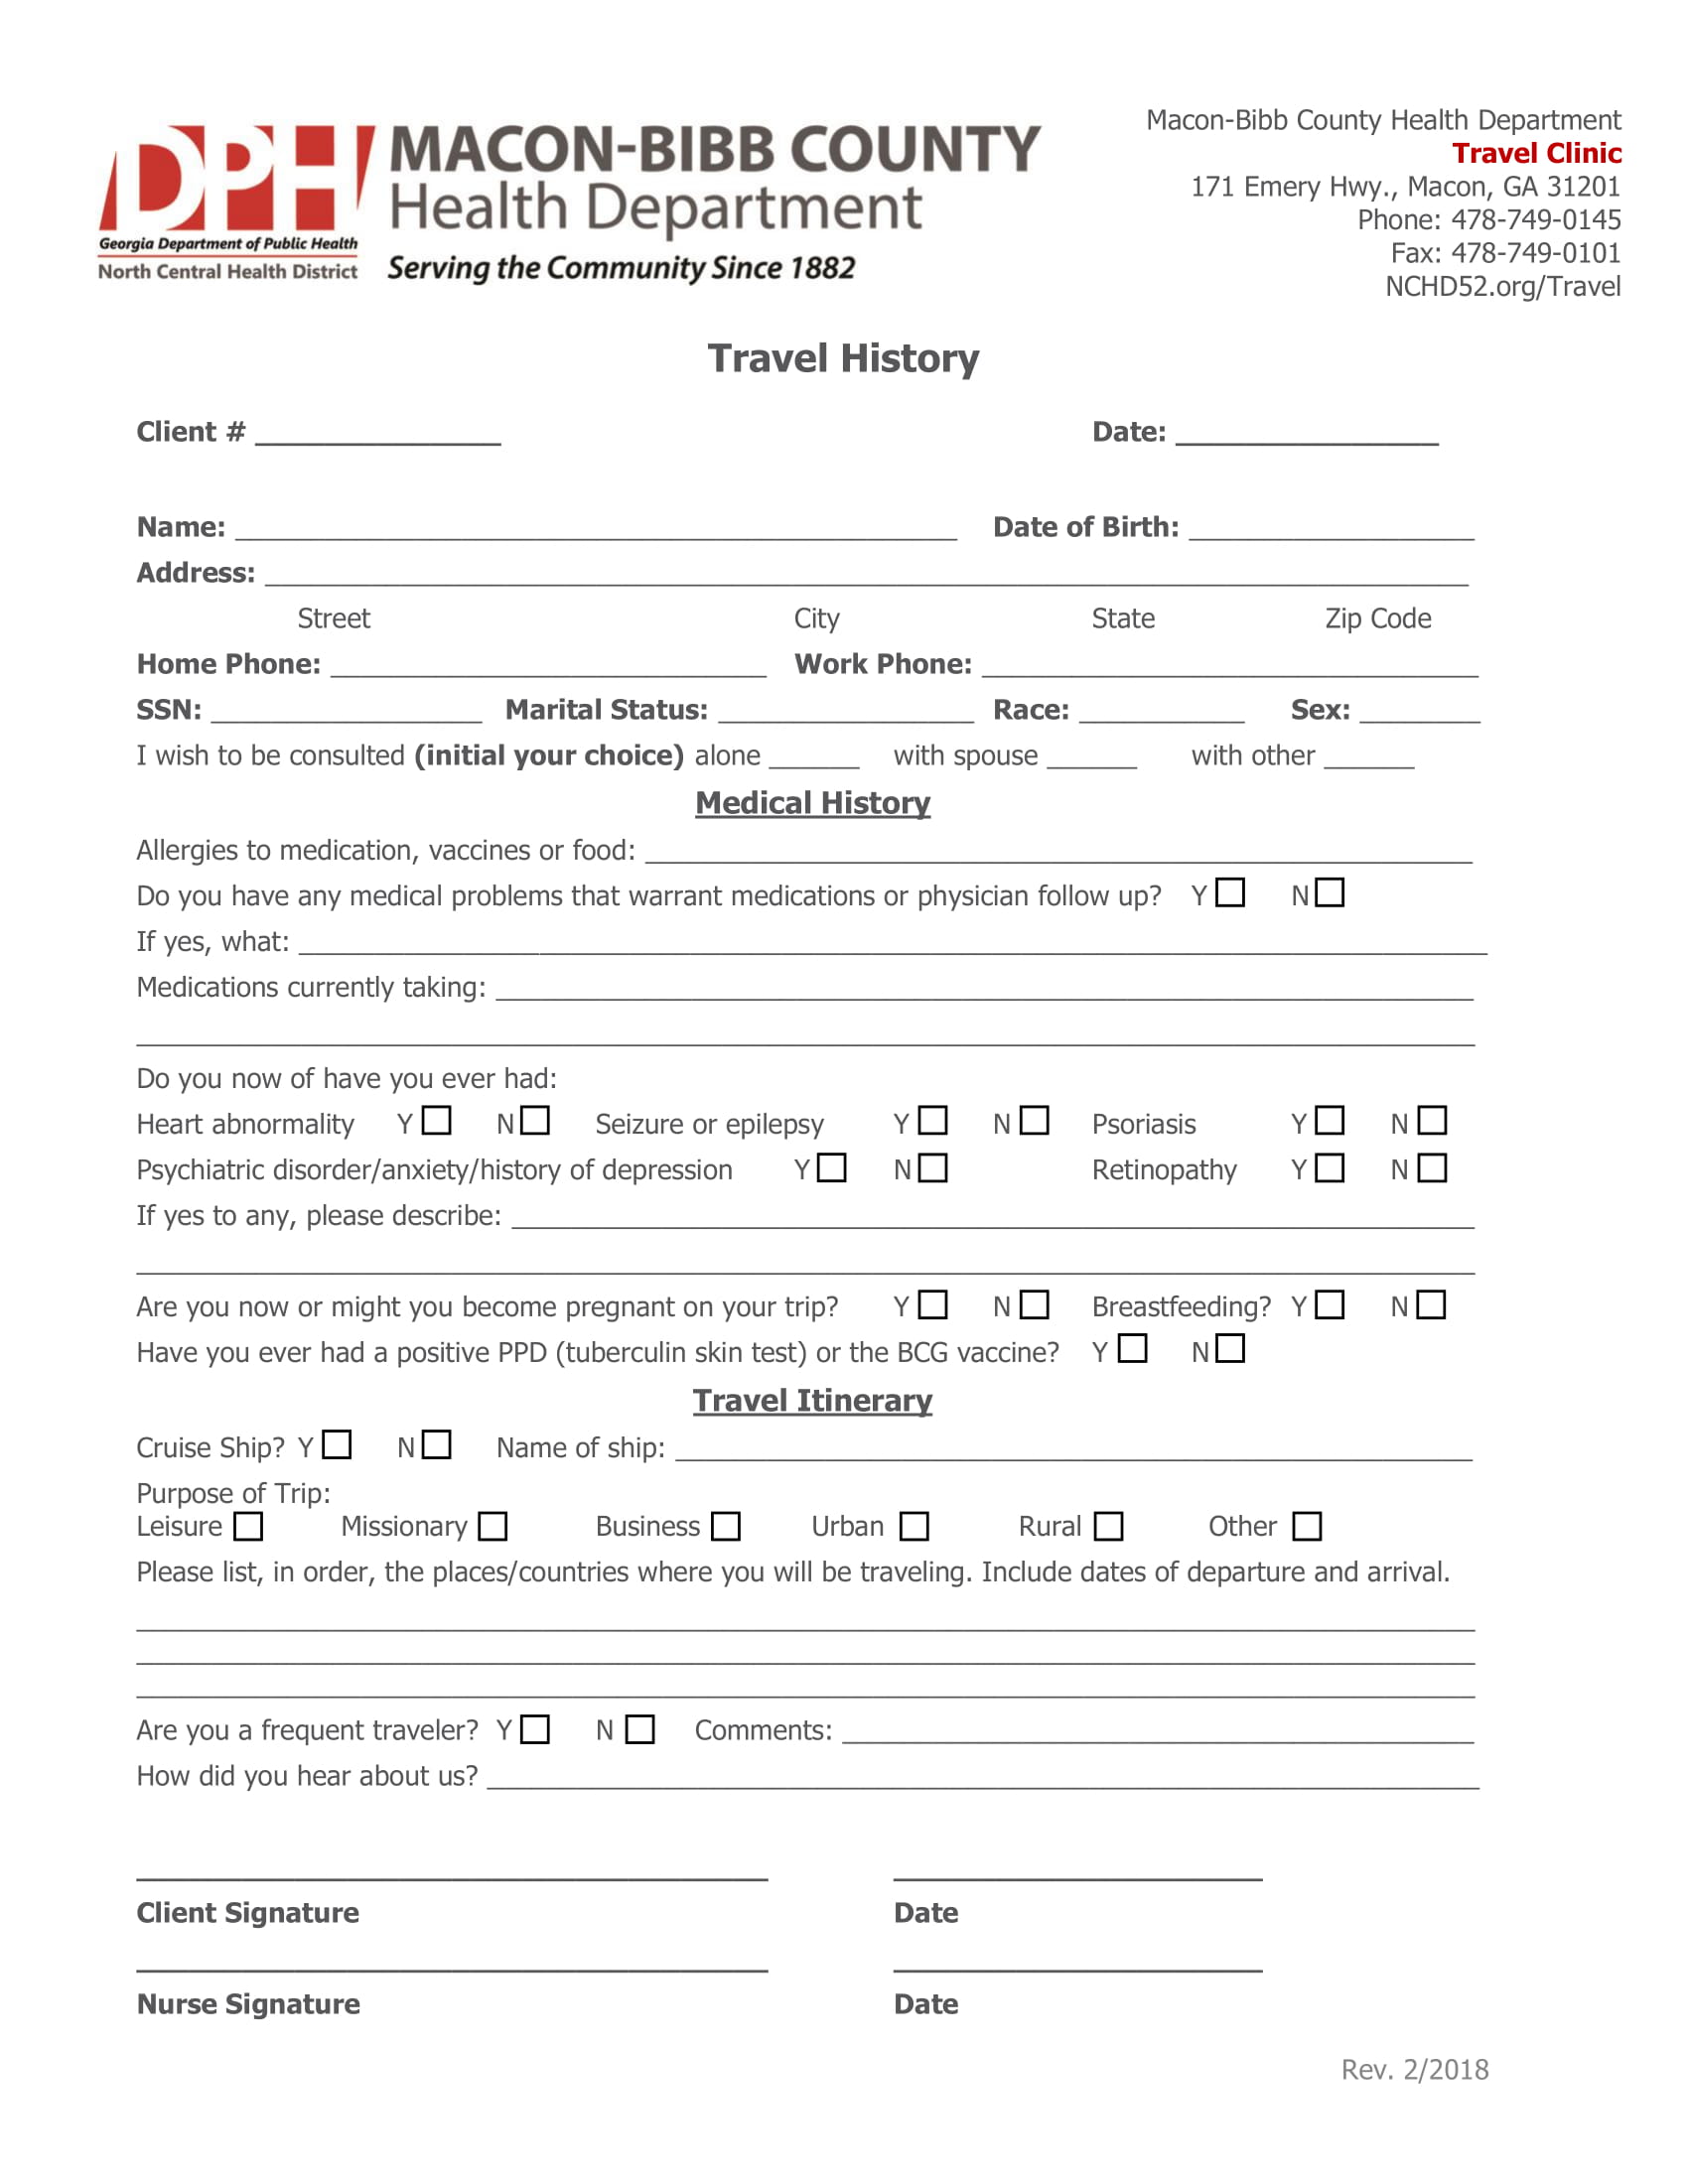 fillable travel history form 1